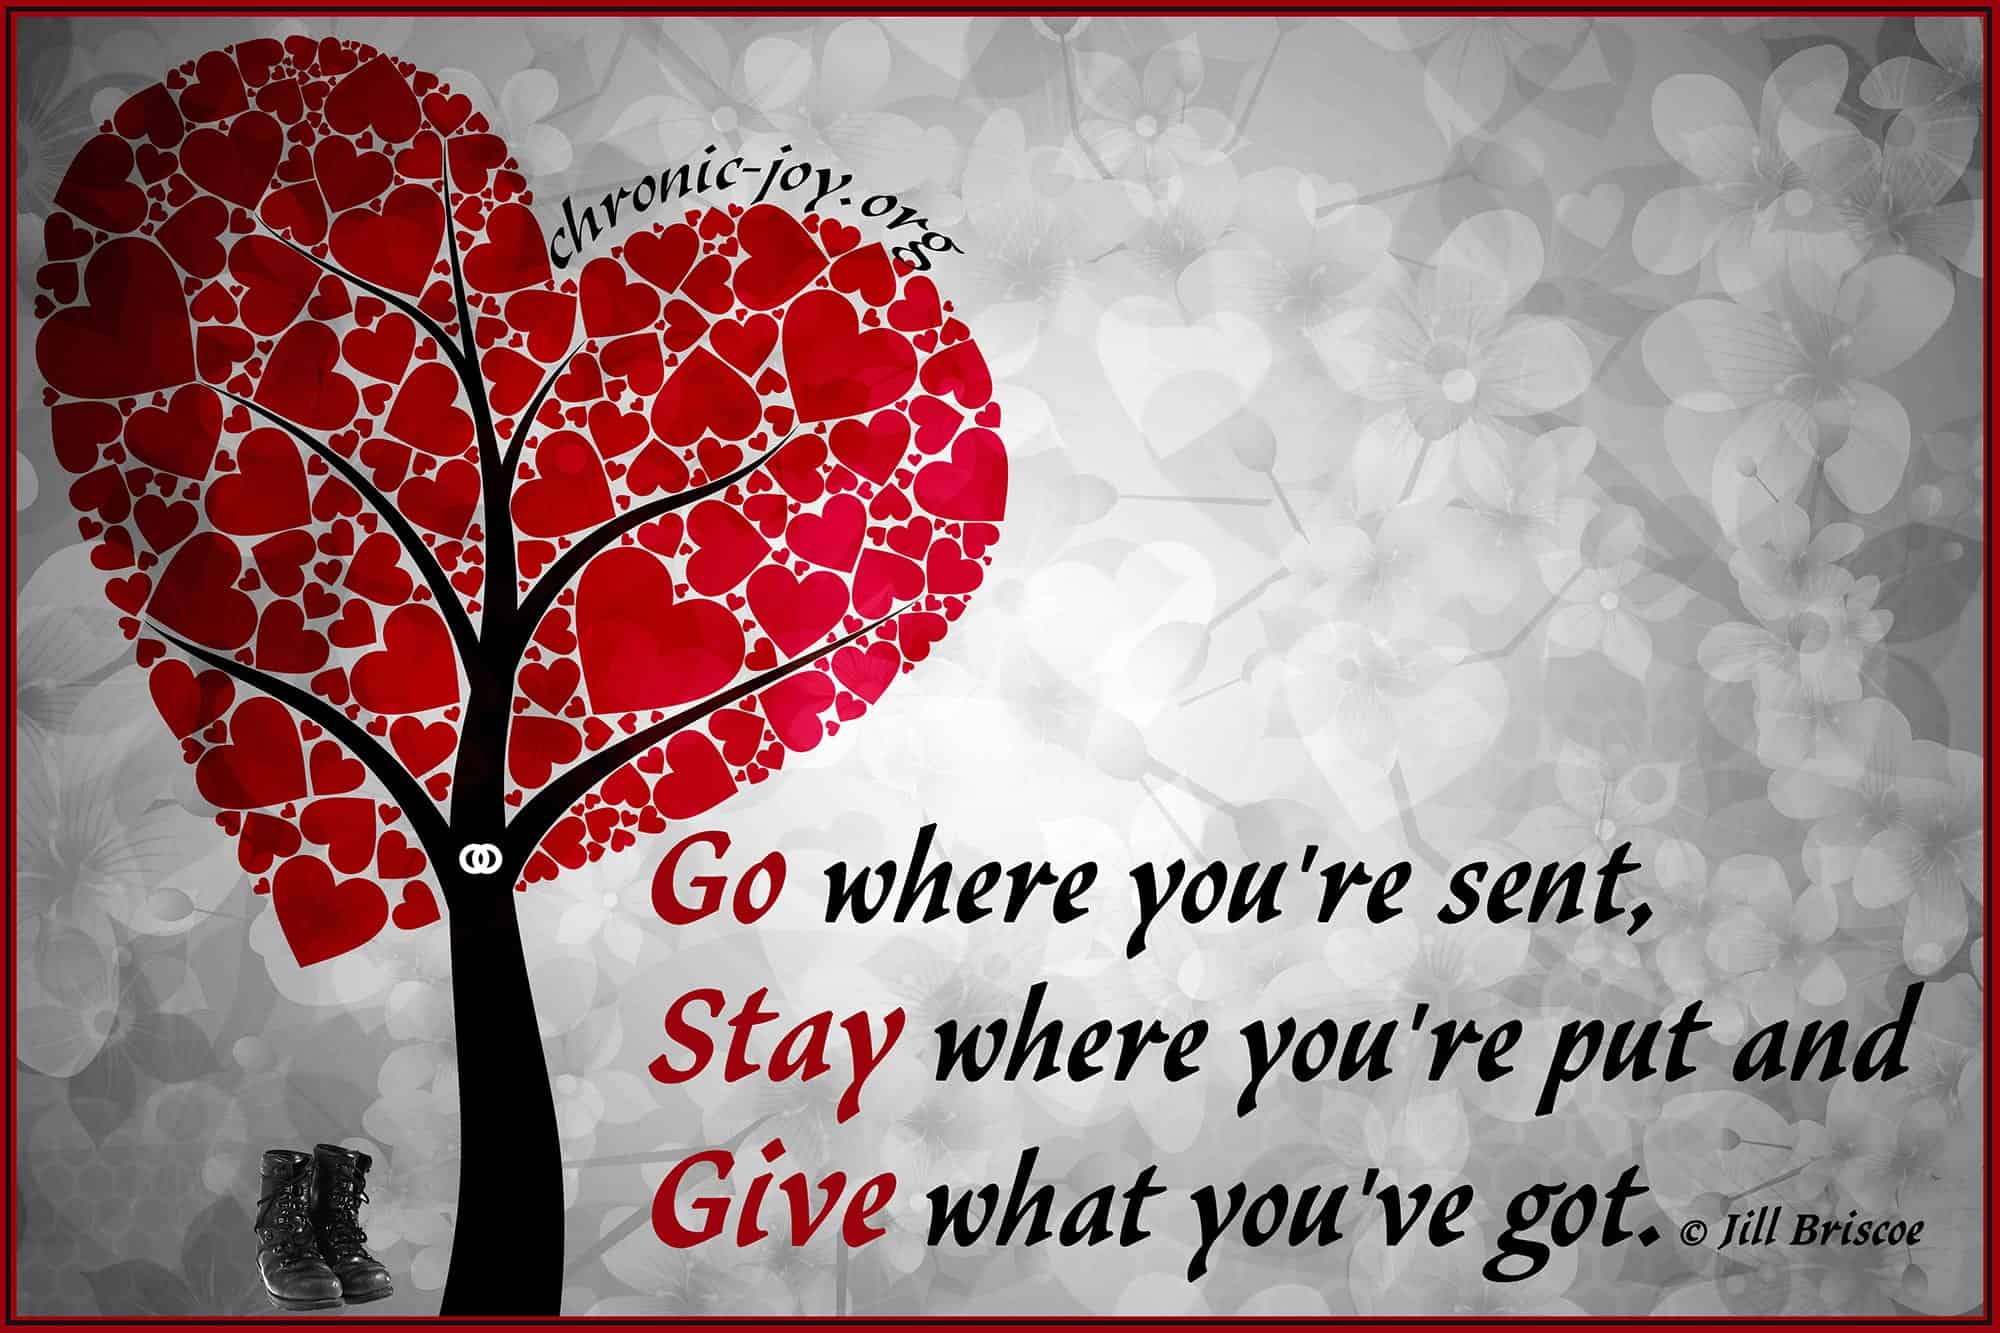 “Go where you’re sent, stay where you’re put and give what you’ve got.” Jill Briscoe